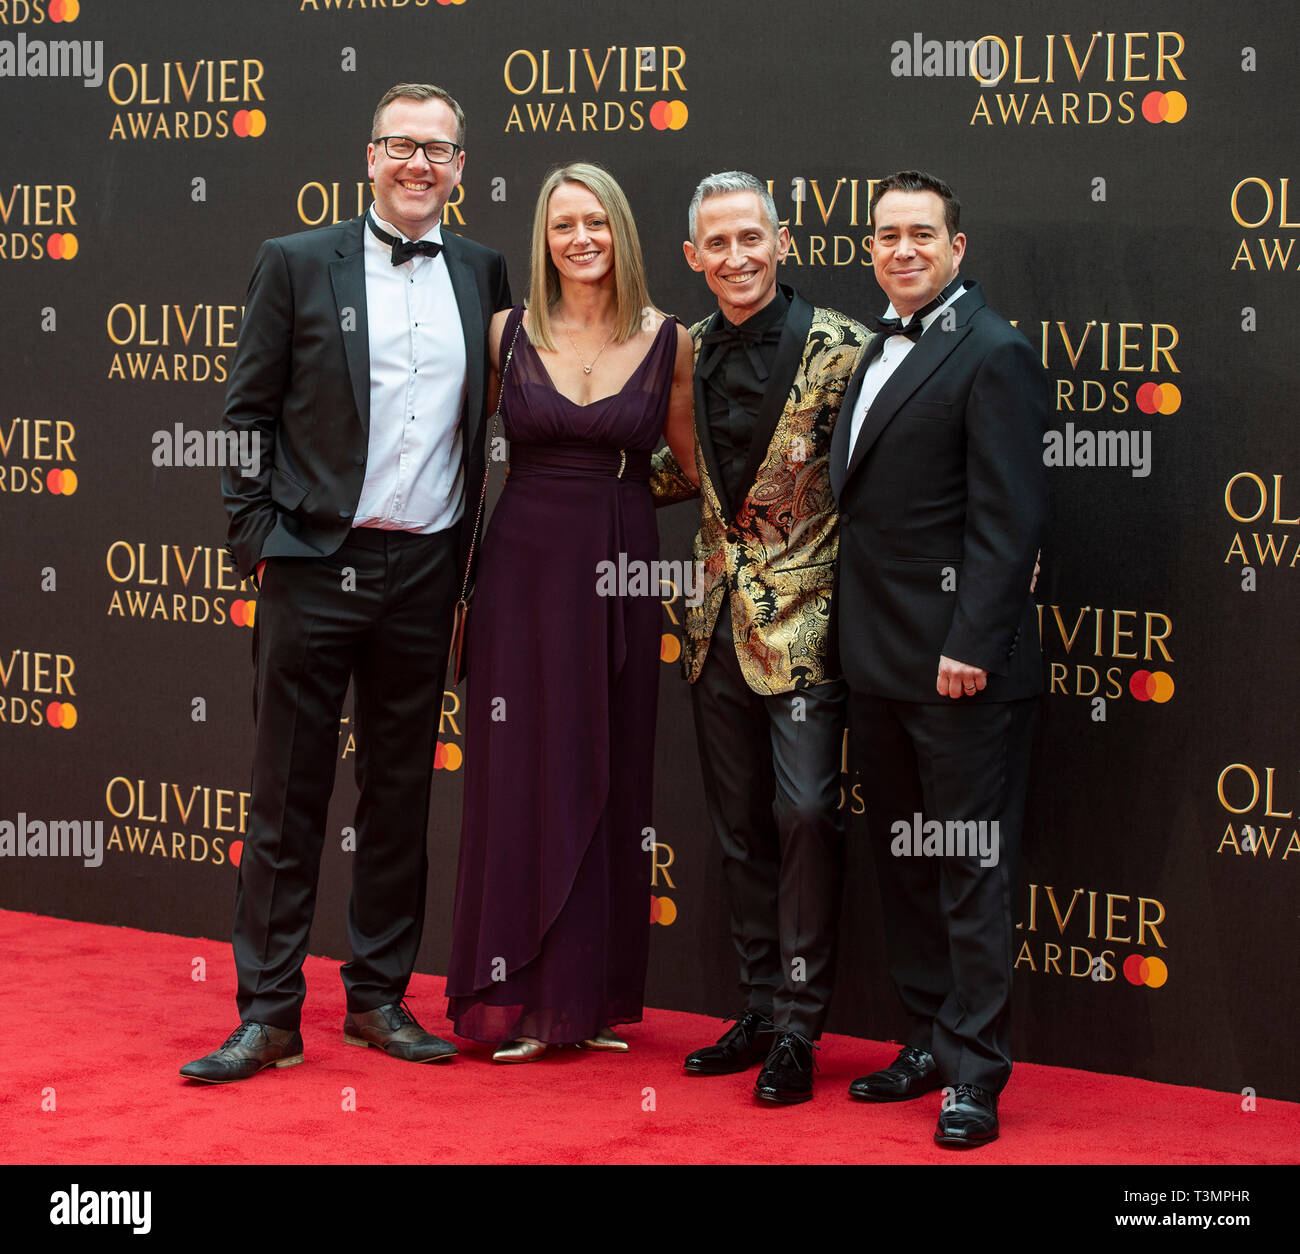 LONDON, ENGLAND - APRIL 07: Guest attends The Olivier Awards 2019 with Mastercard at Royal Albert Hall on April 7, 2019 in London, England Stock Photo